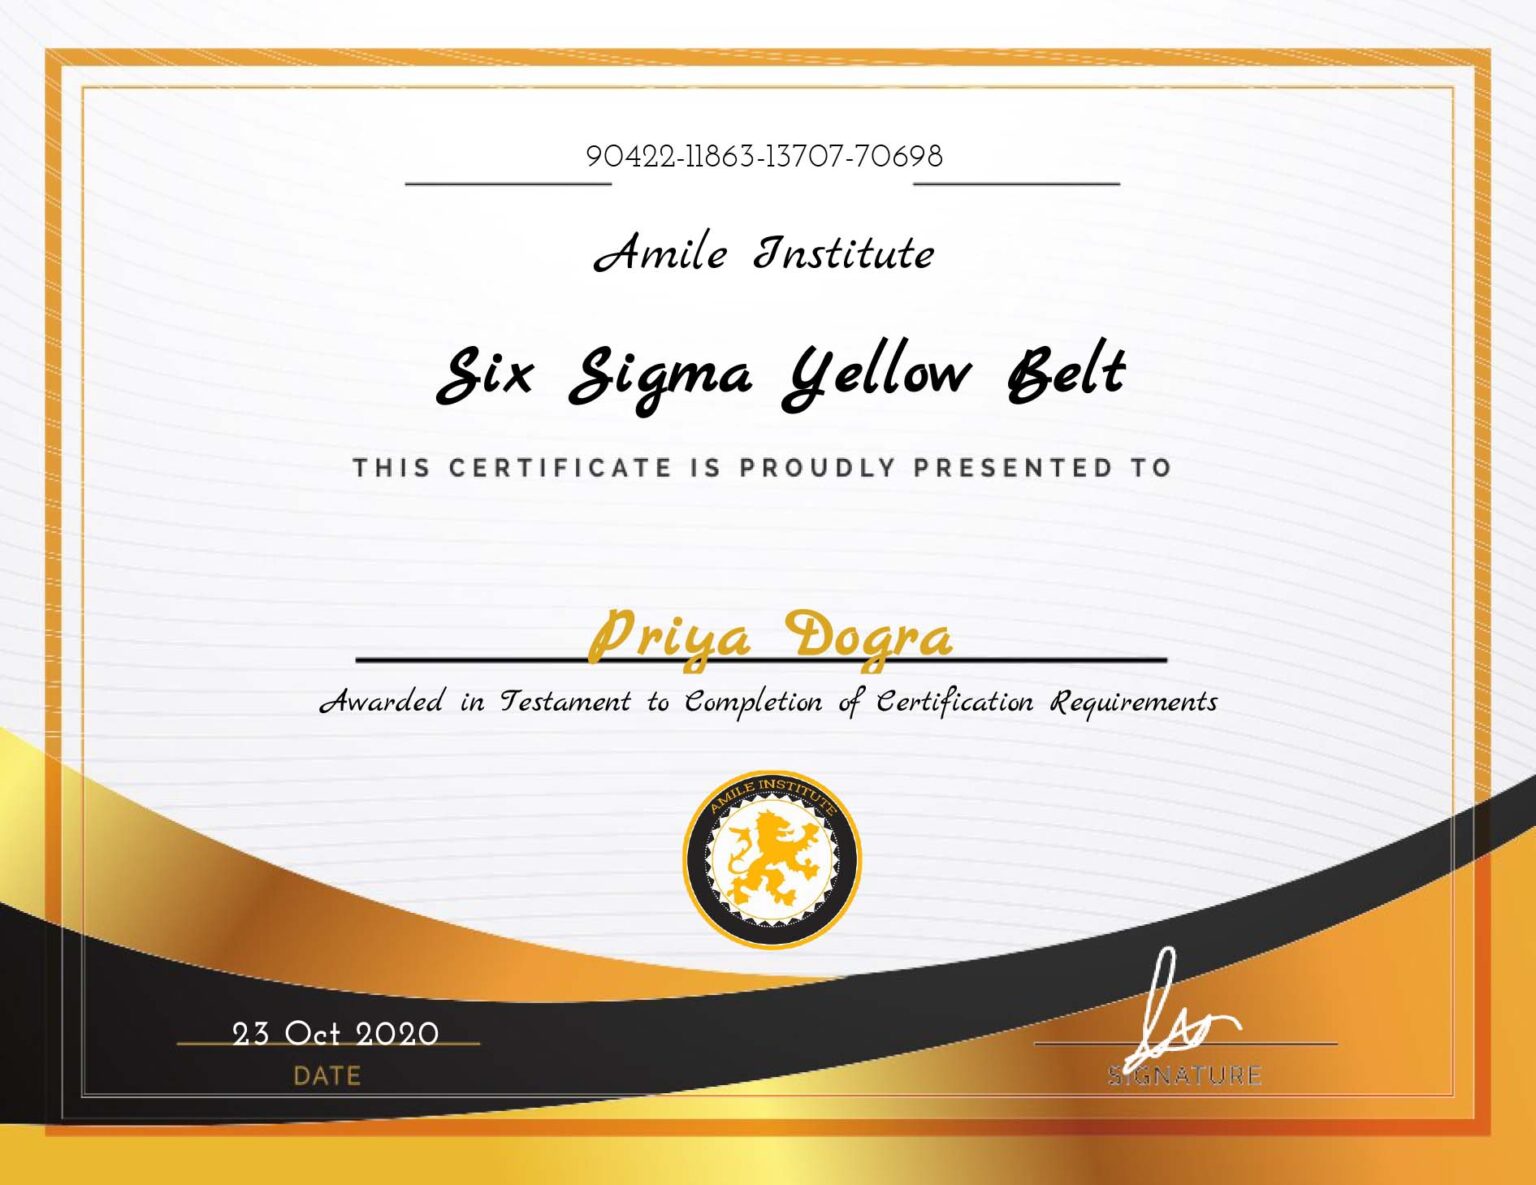 Six Sigma Yellow Belt Certification Answers - Quiz Answers Amile Institute